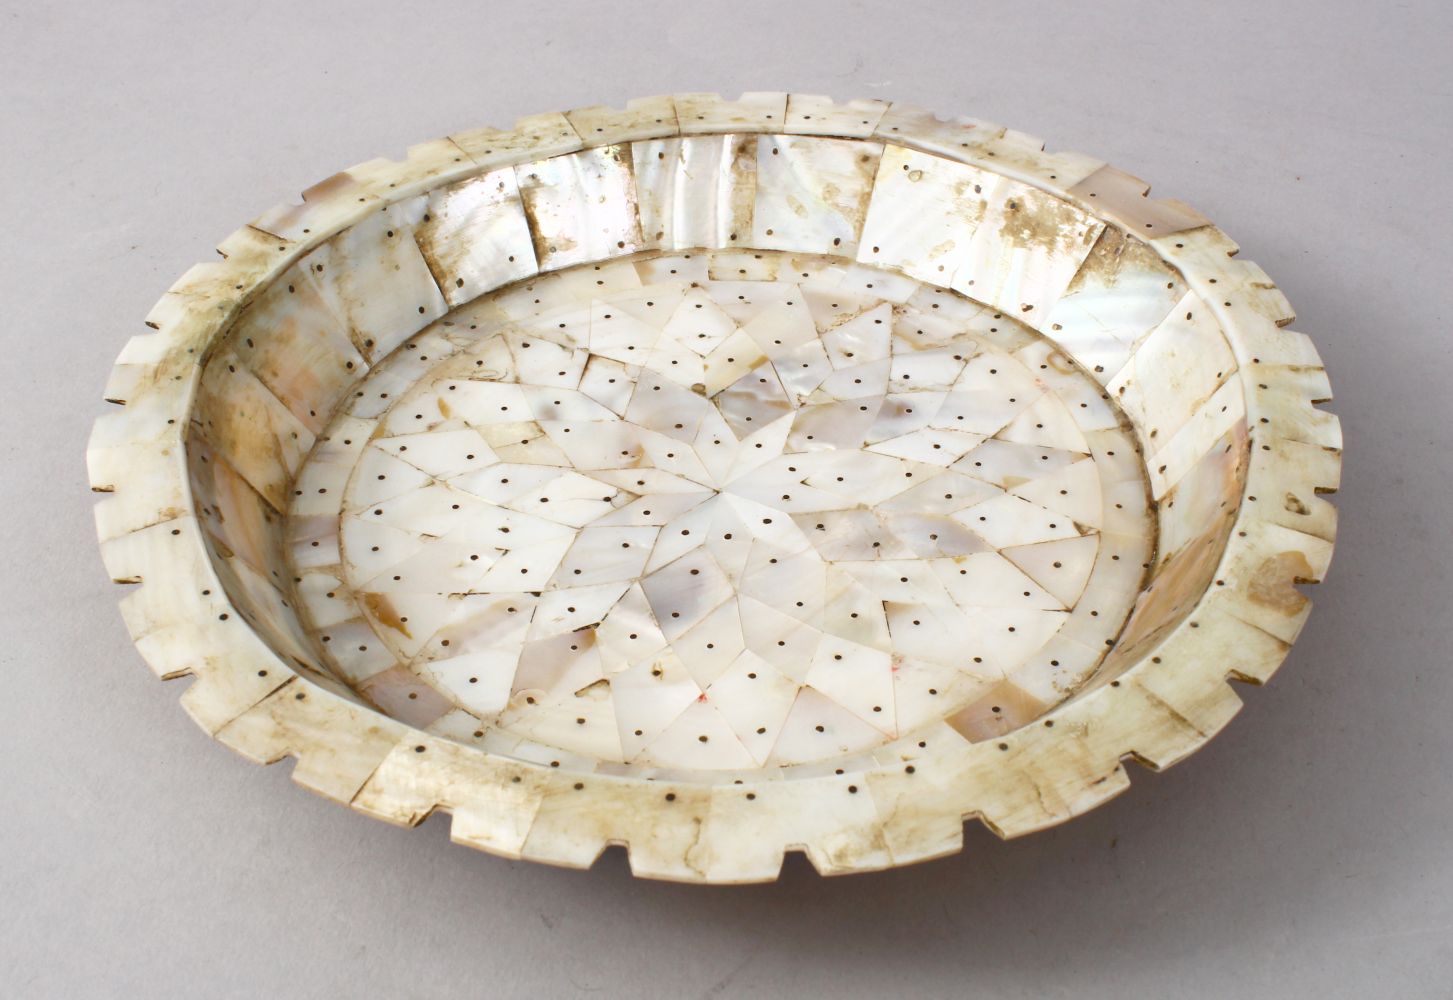 A GOOD 18TH / 19TH CENTURY GOA MOTHER OF PEARL DISH, the dish formed from sectional cuts of mother